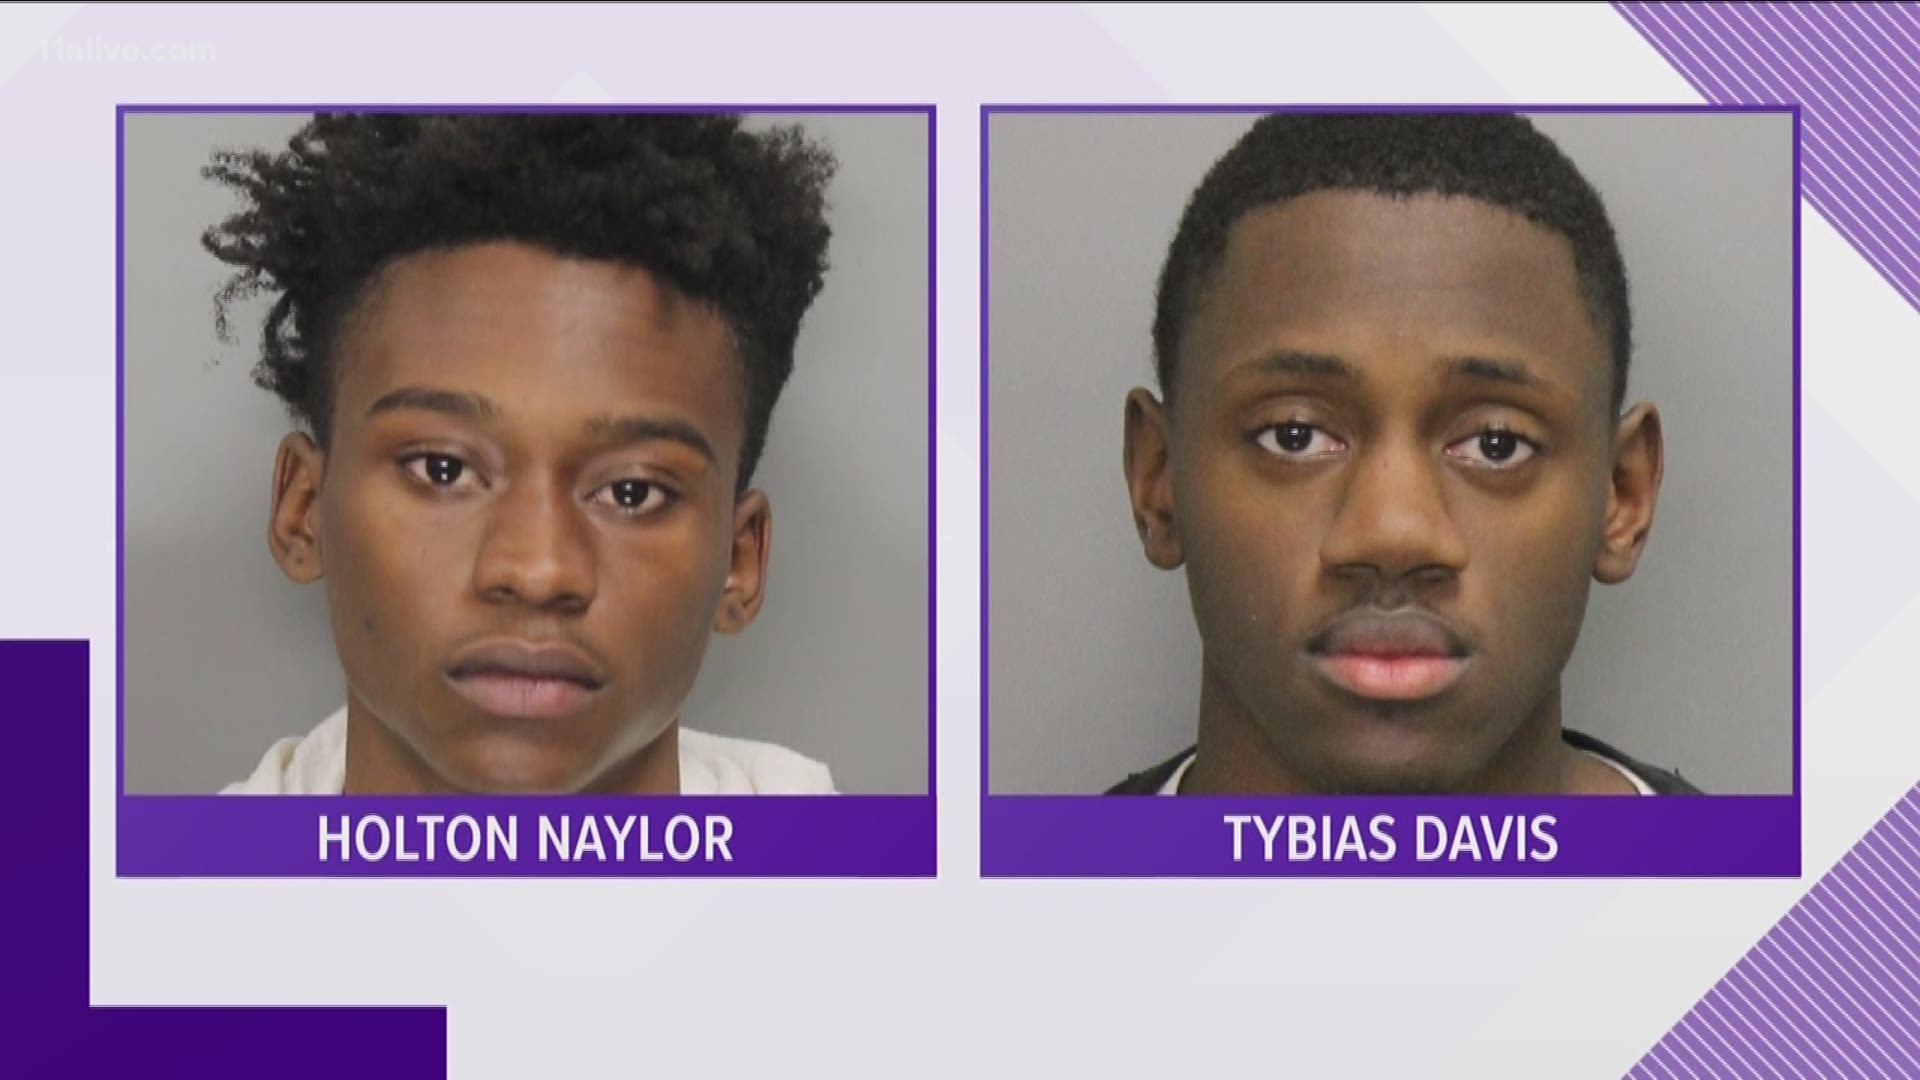 The teens at Pebblebrook High School had a loaded gun in a backpack along with baggies of marijuana with intent to distribute, according to police.